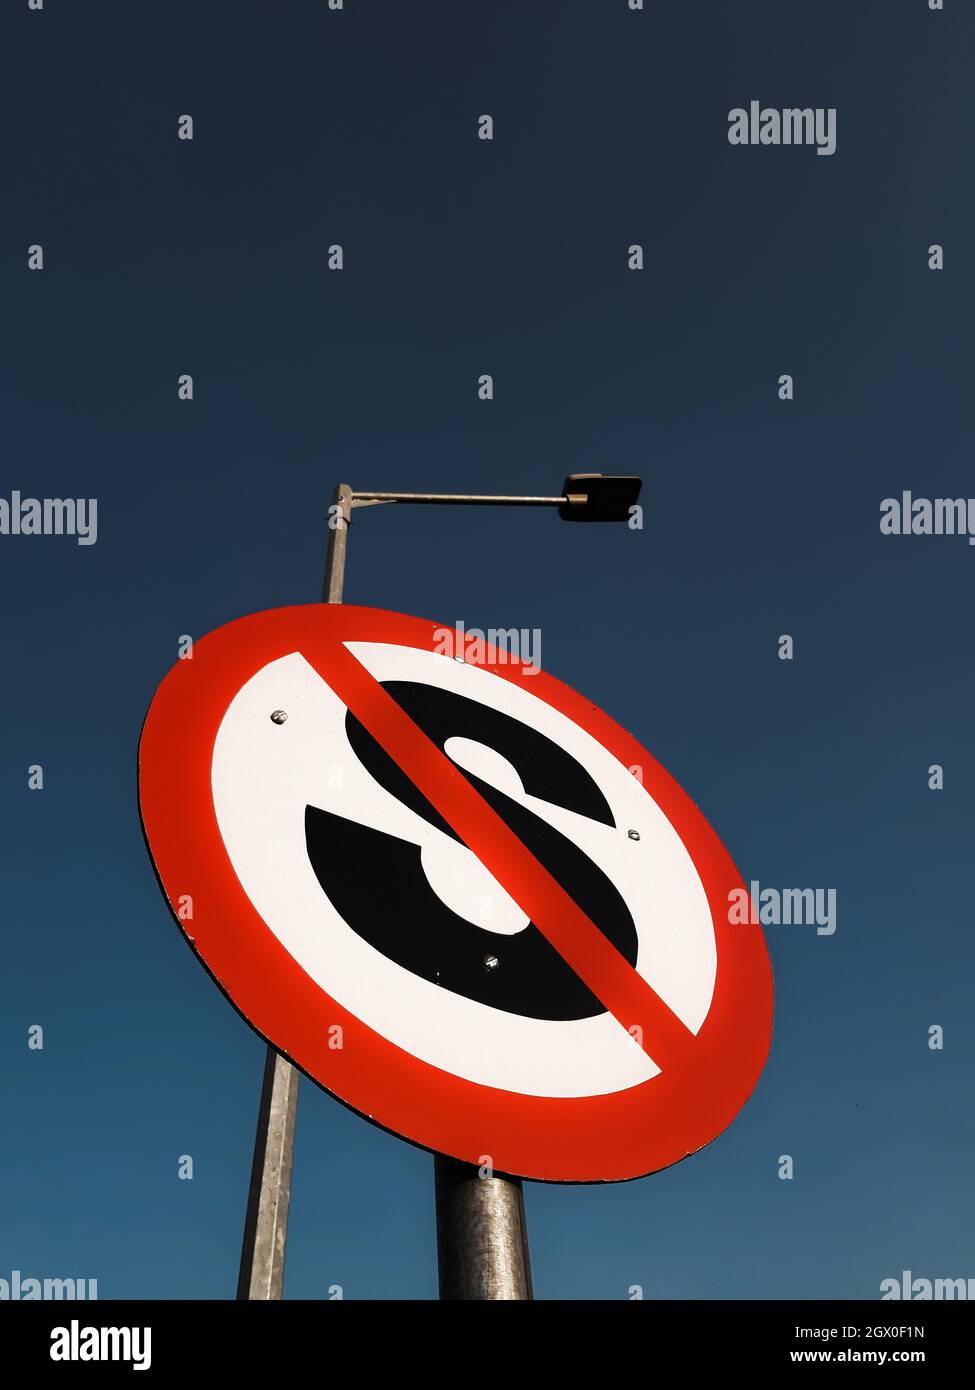 Low Angle View Of Road Sign And Electric Street Lamp Against Blue Sky Stock Photo